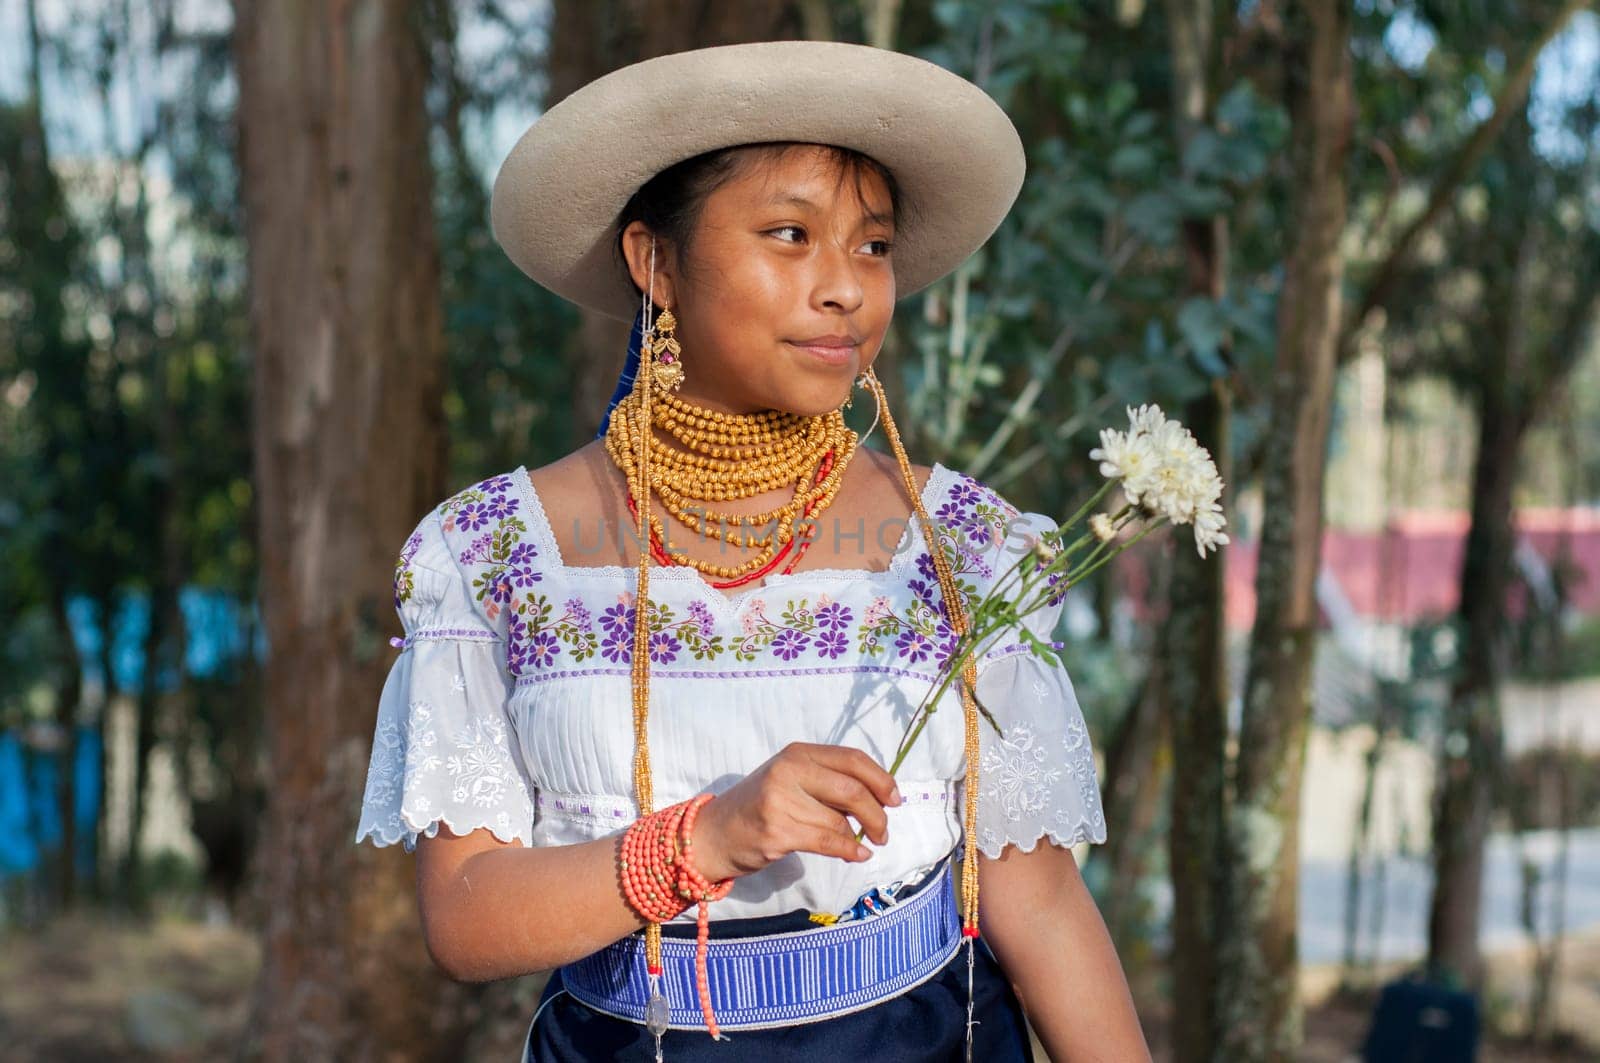 Floral Delight: Indigenous Girl Celebrating The Day of the Dead by Raulmartin